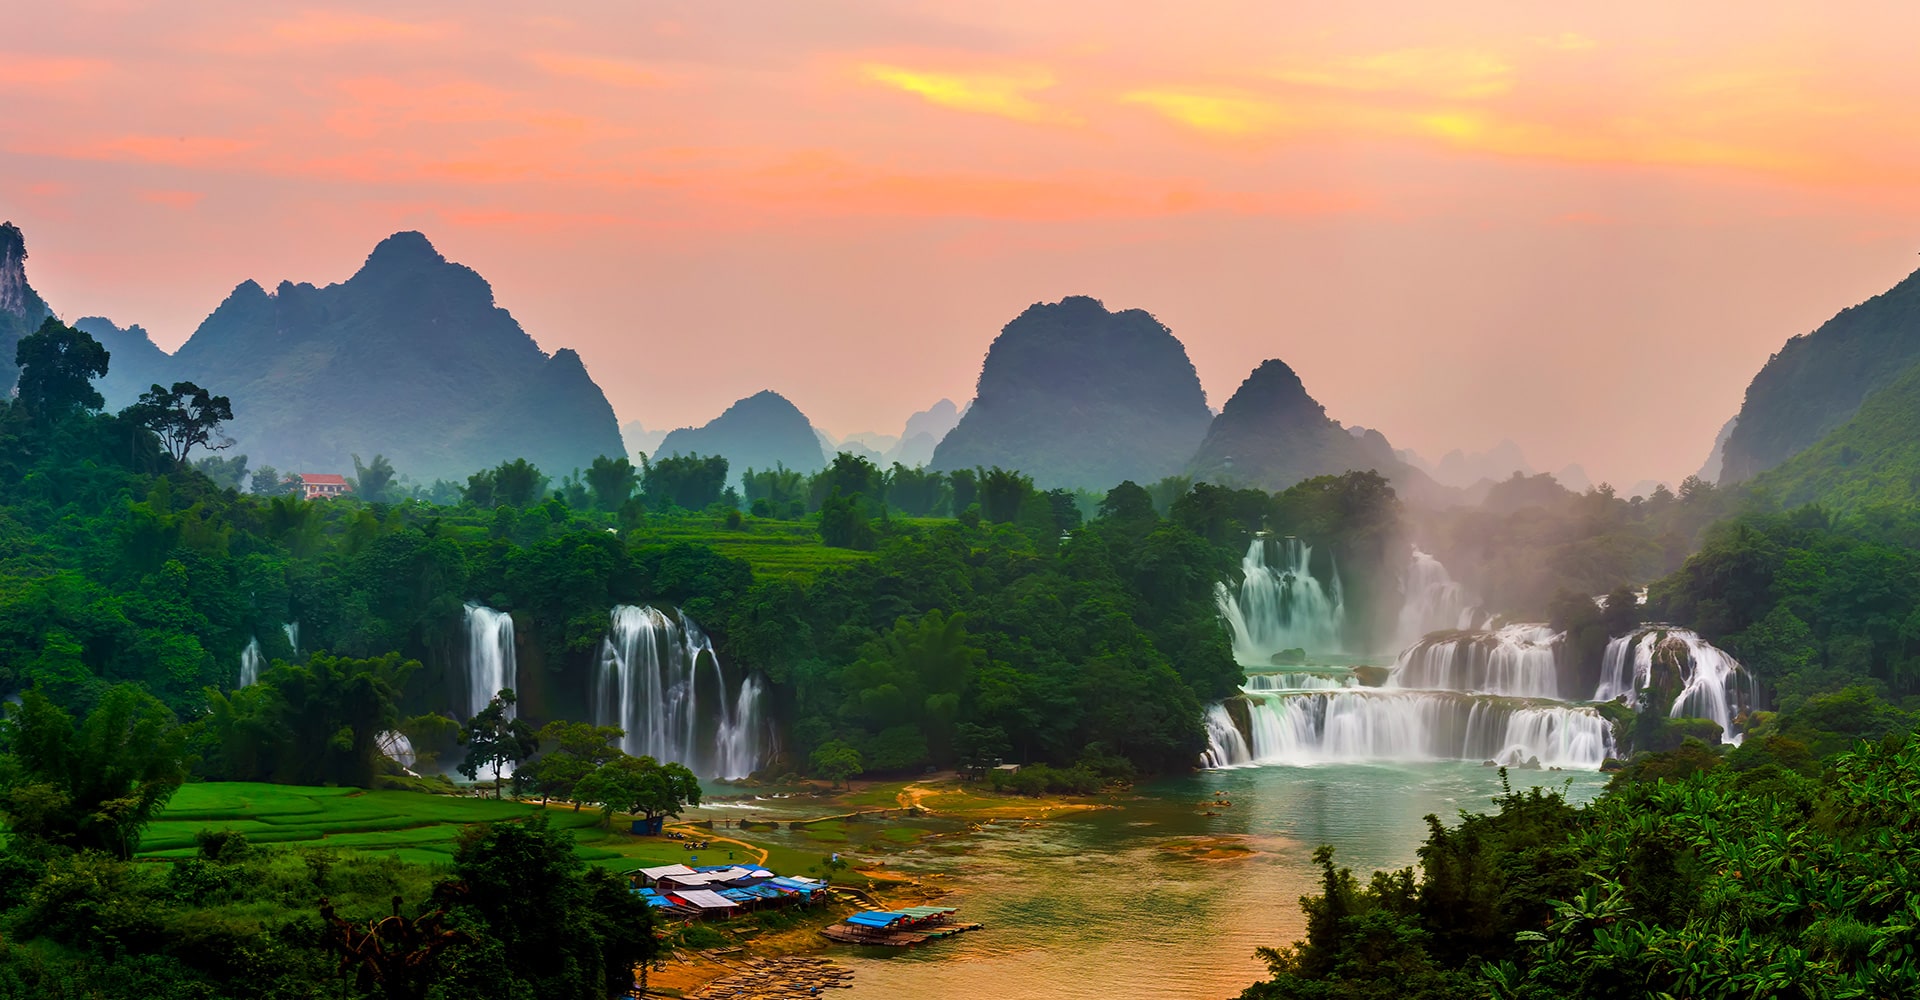 Breathtaking Forests with Cascading Waterfalls and Towering Mountains During a Serene Sunset in Vietnam.